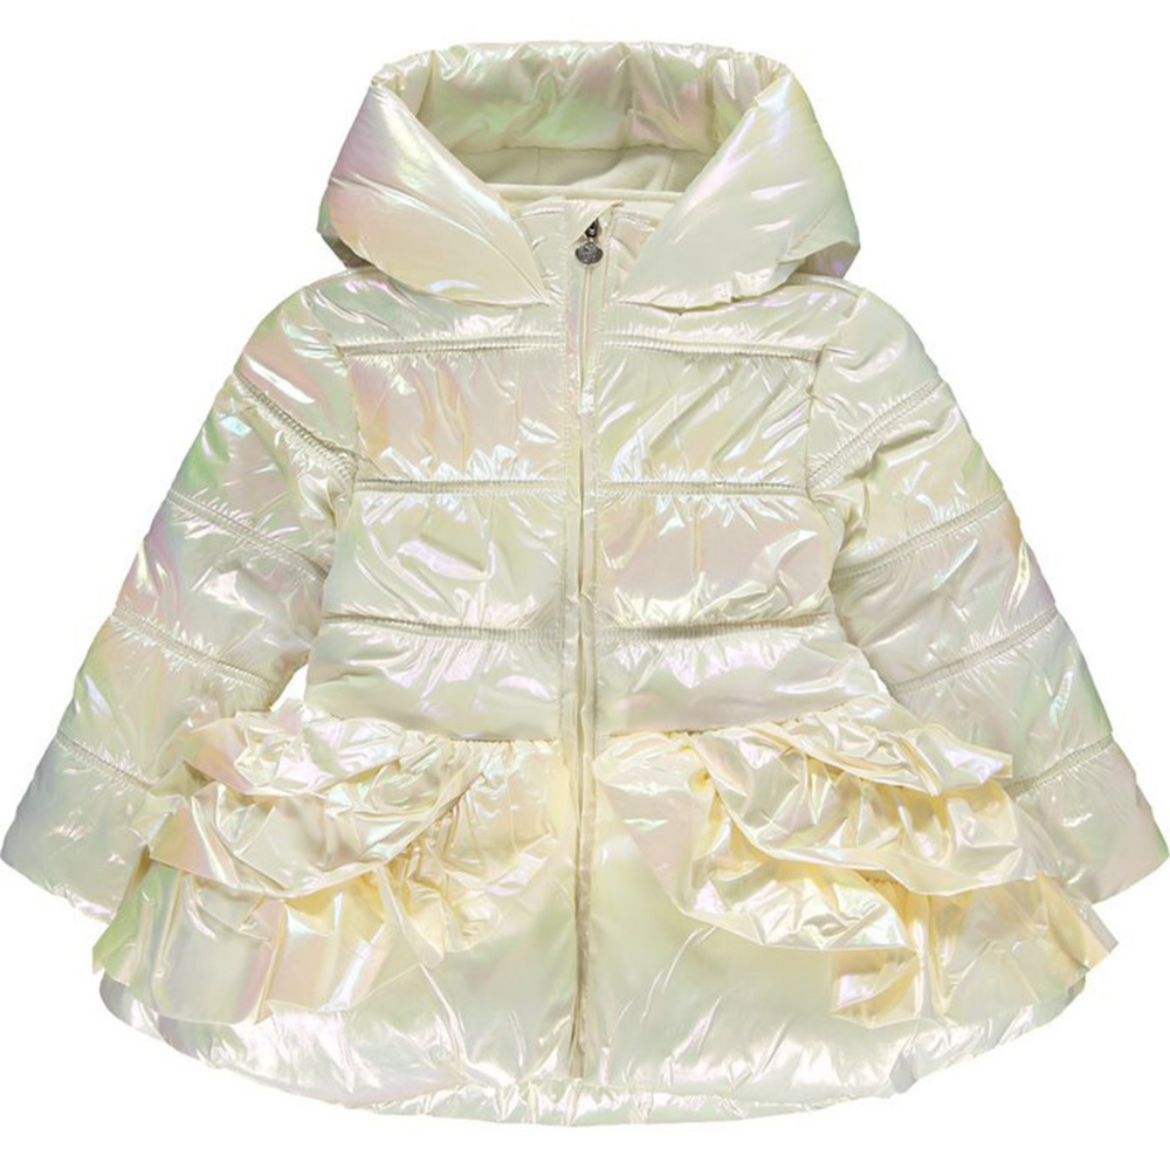 Picture of A Dee Girls 'Amy' White Shimmer Jacket